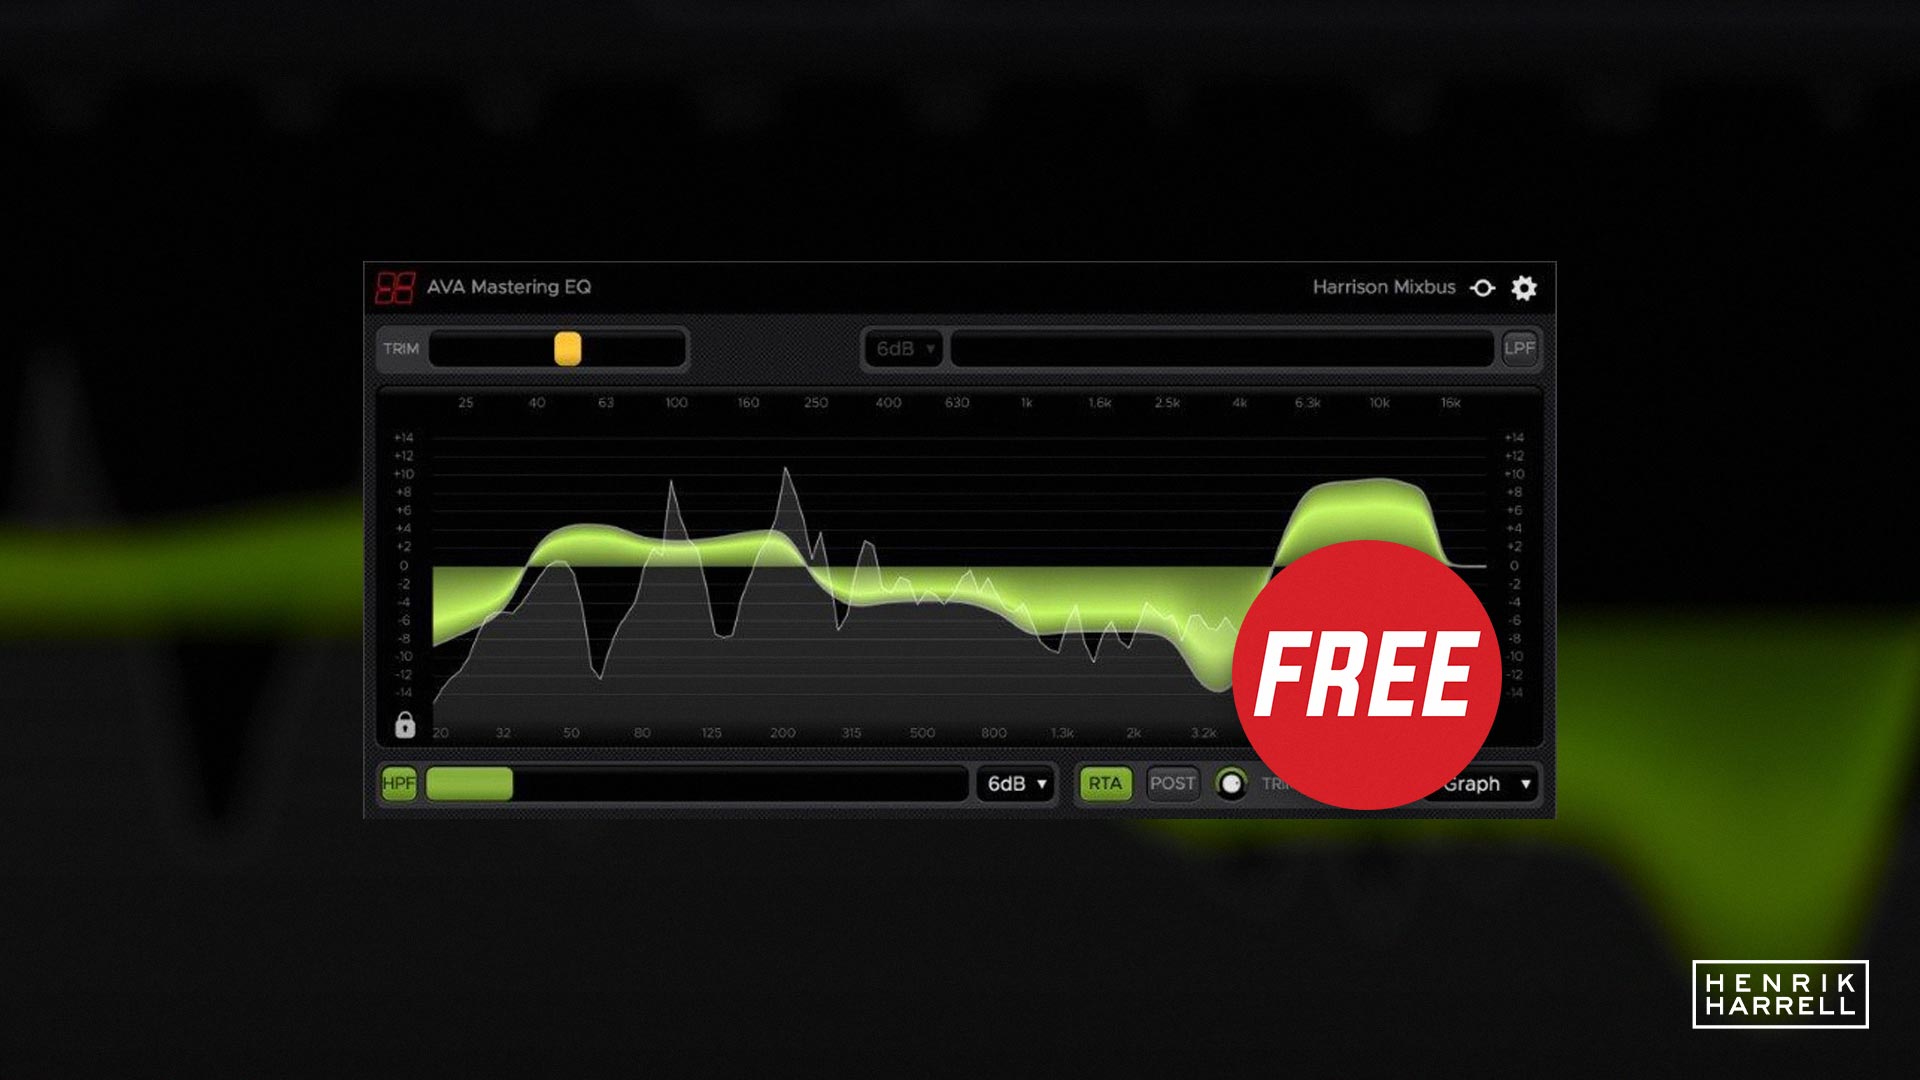 AVA Mastering EQ by Harrison Consoles is free for a limited time